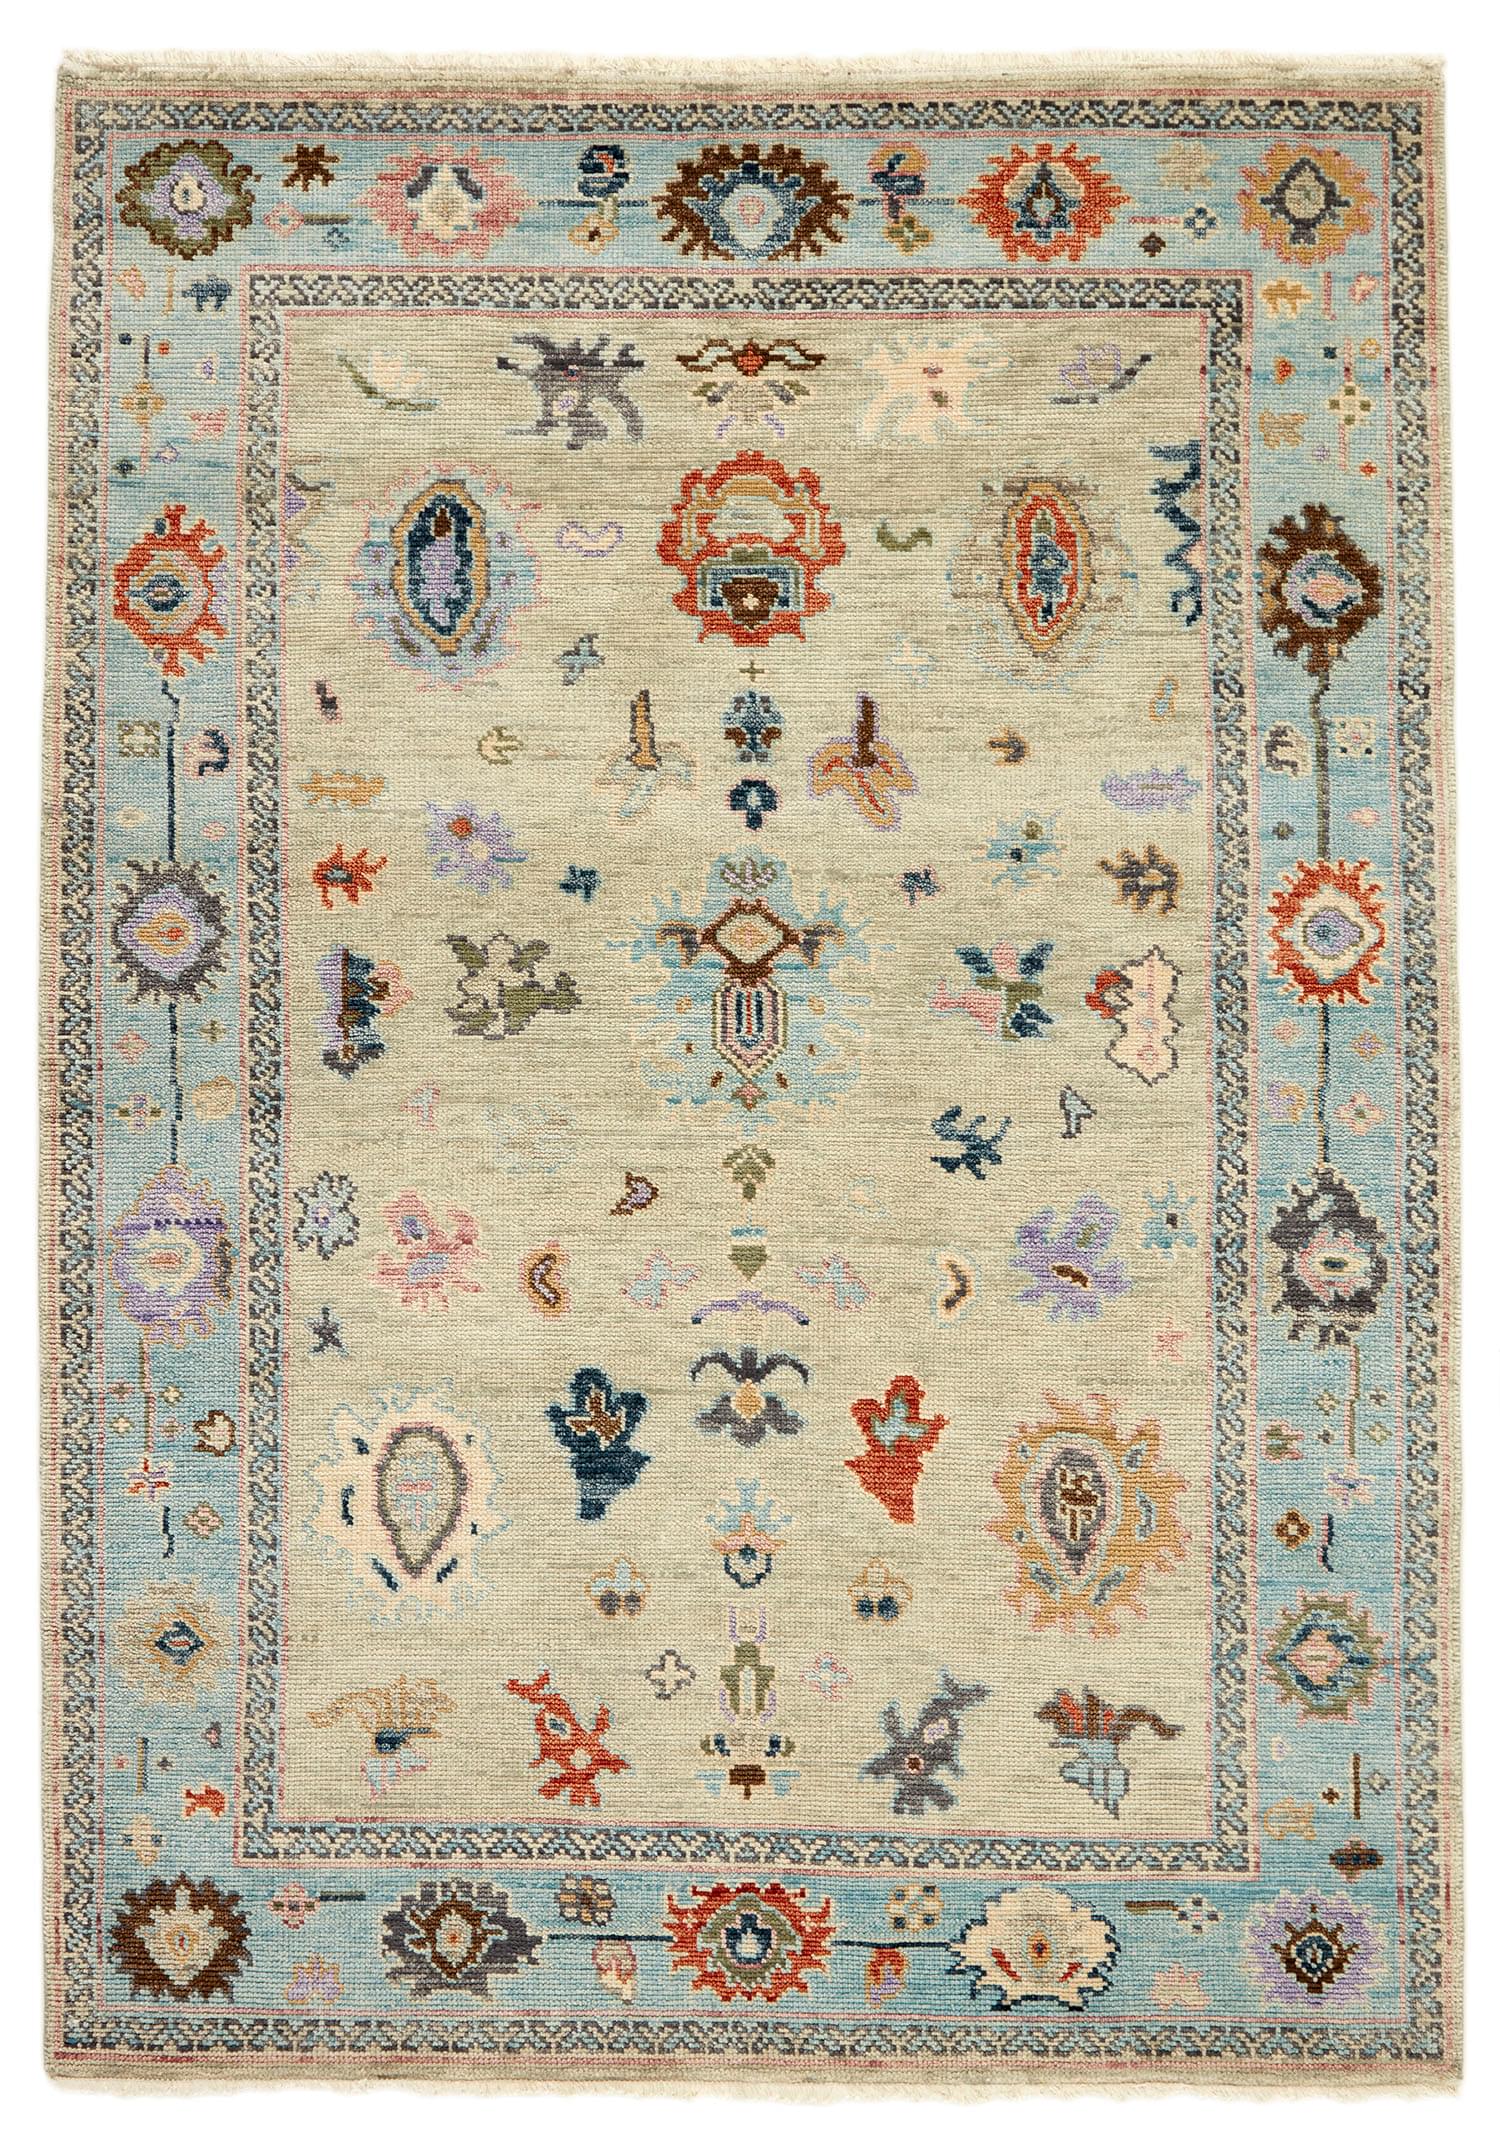 authentic Oriental rug with traditional motifs in red, pink, yellow, blue, green, purple, beige and brown